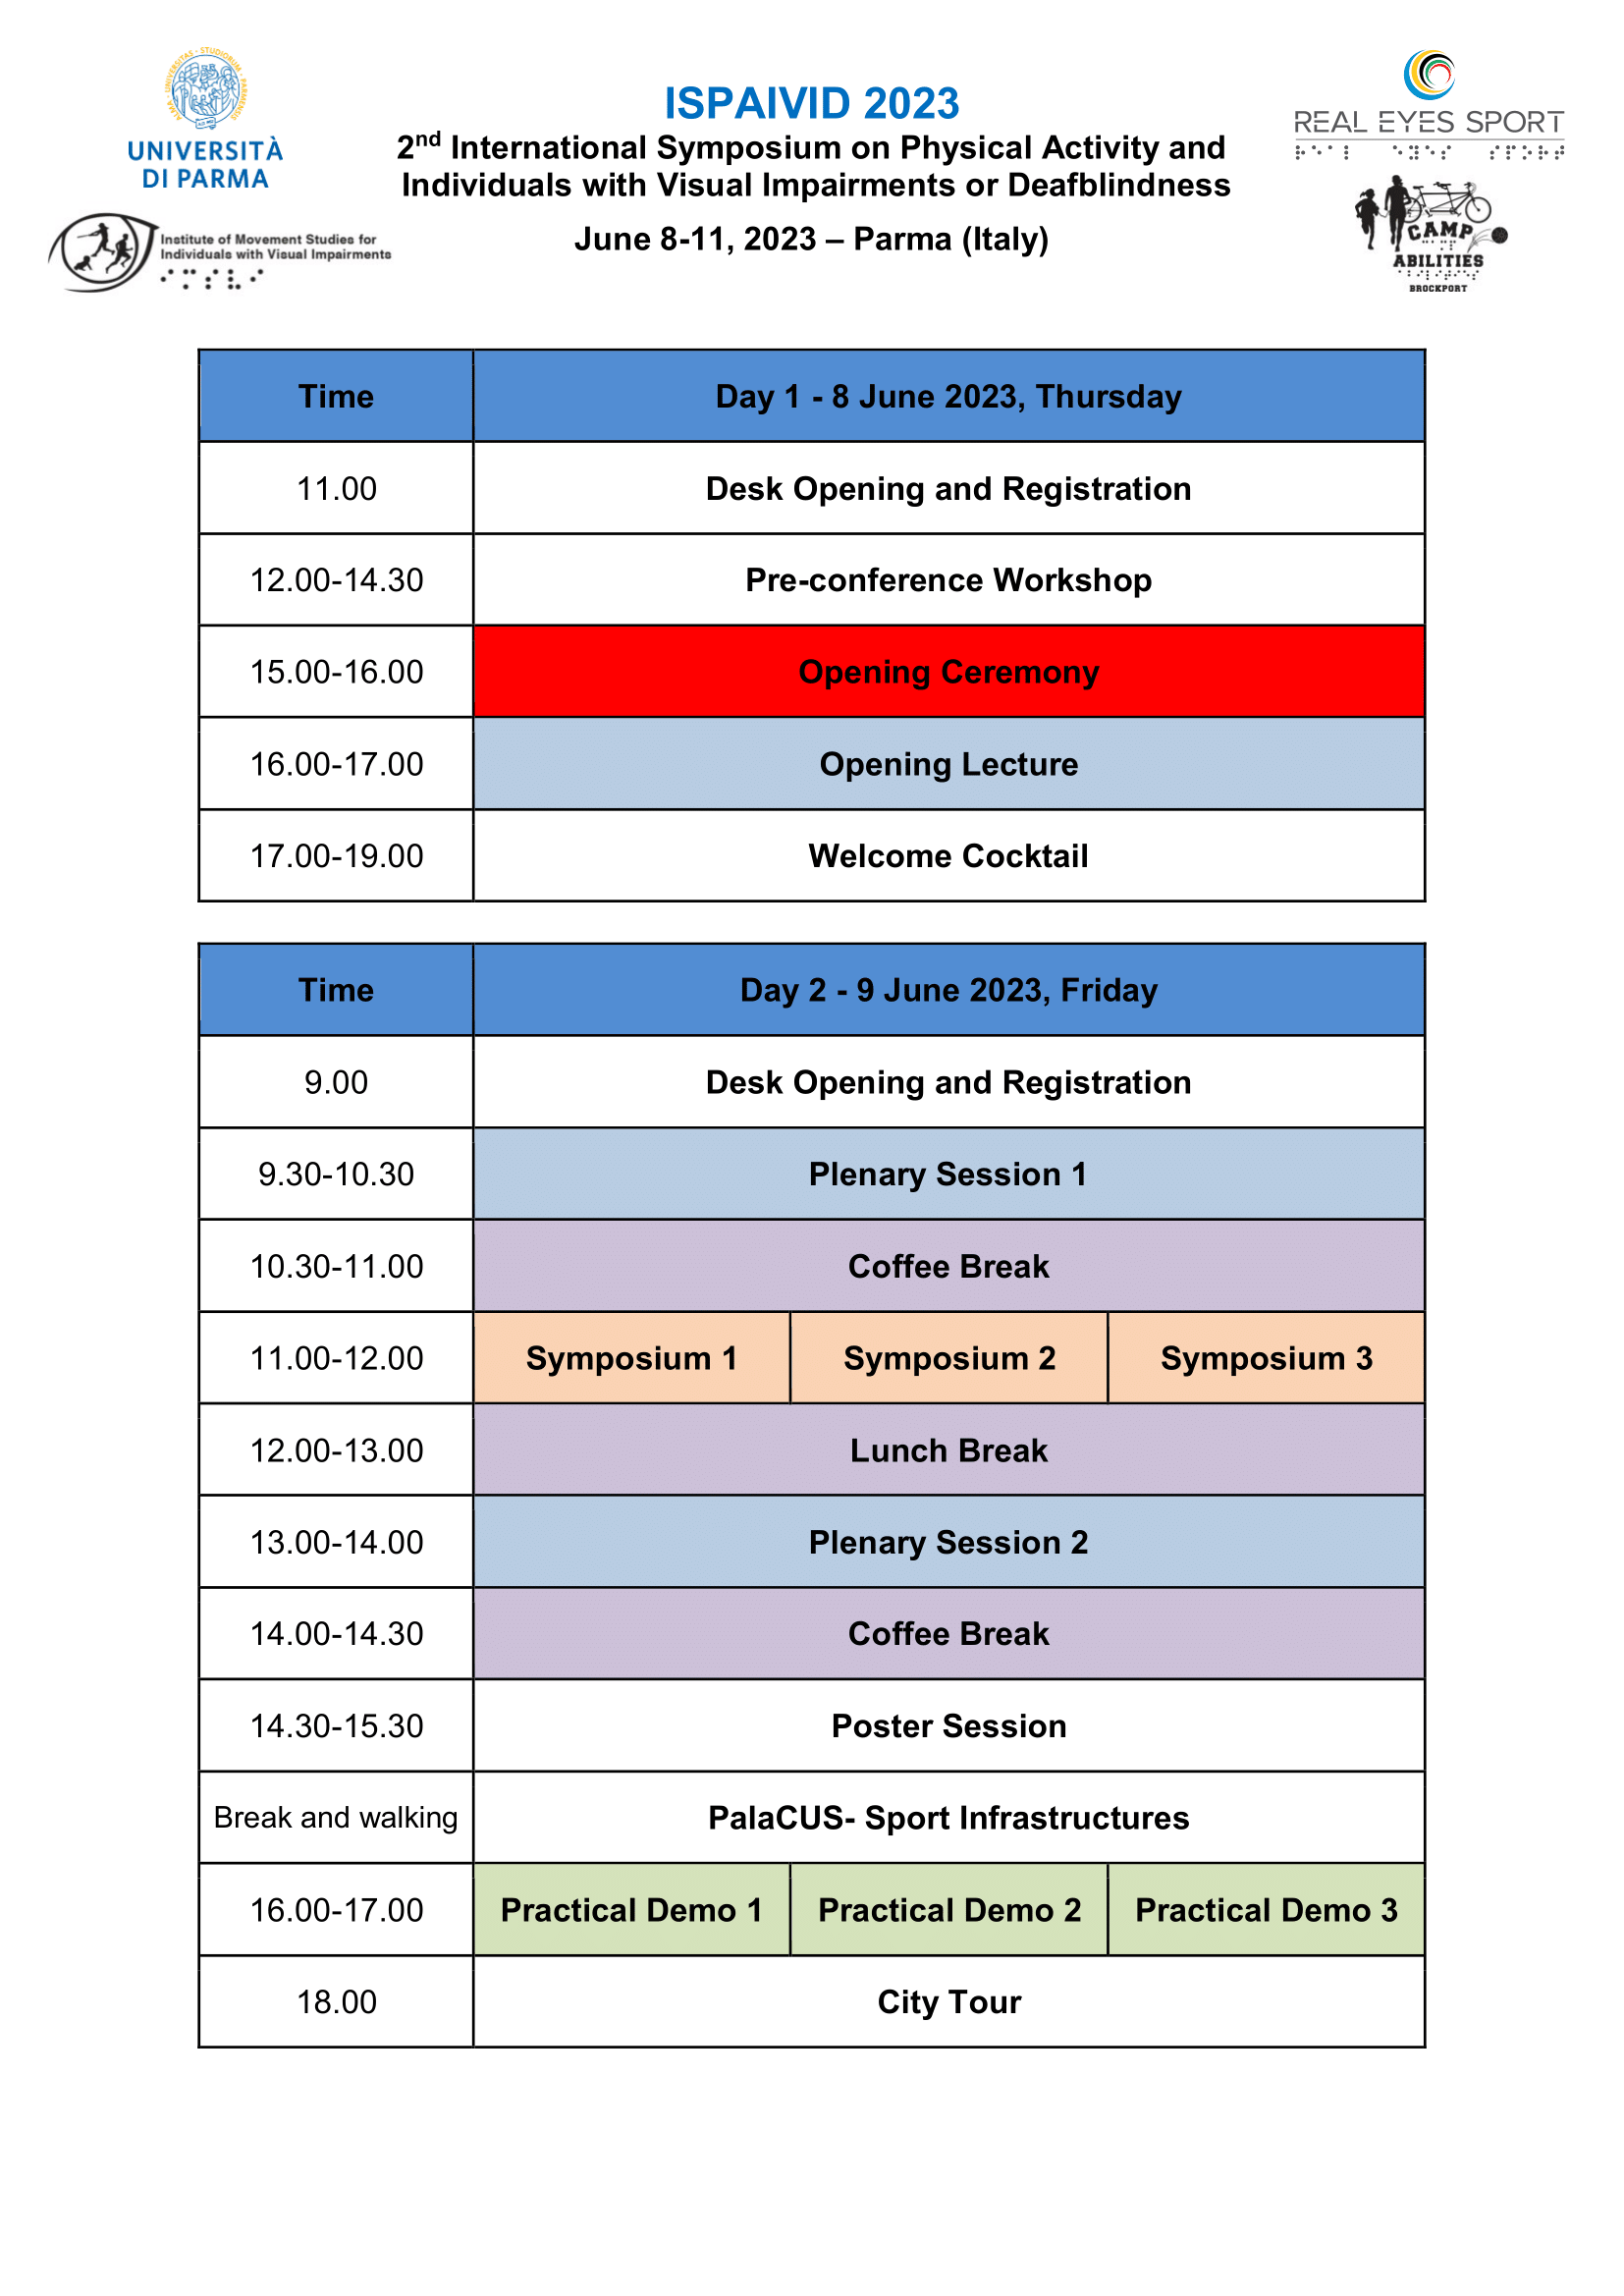 1st and 2nd day of tentative program